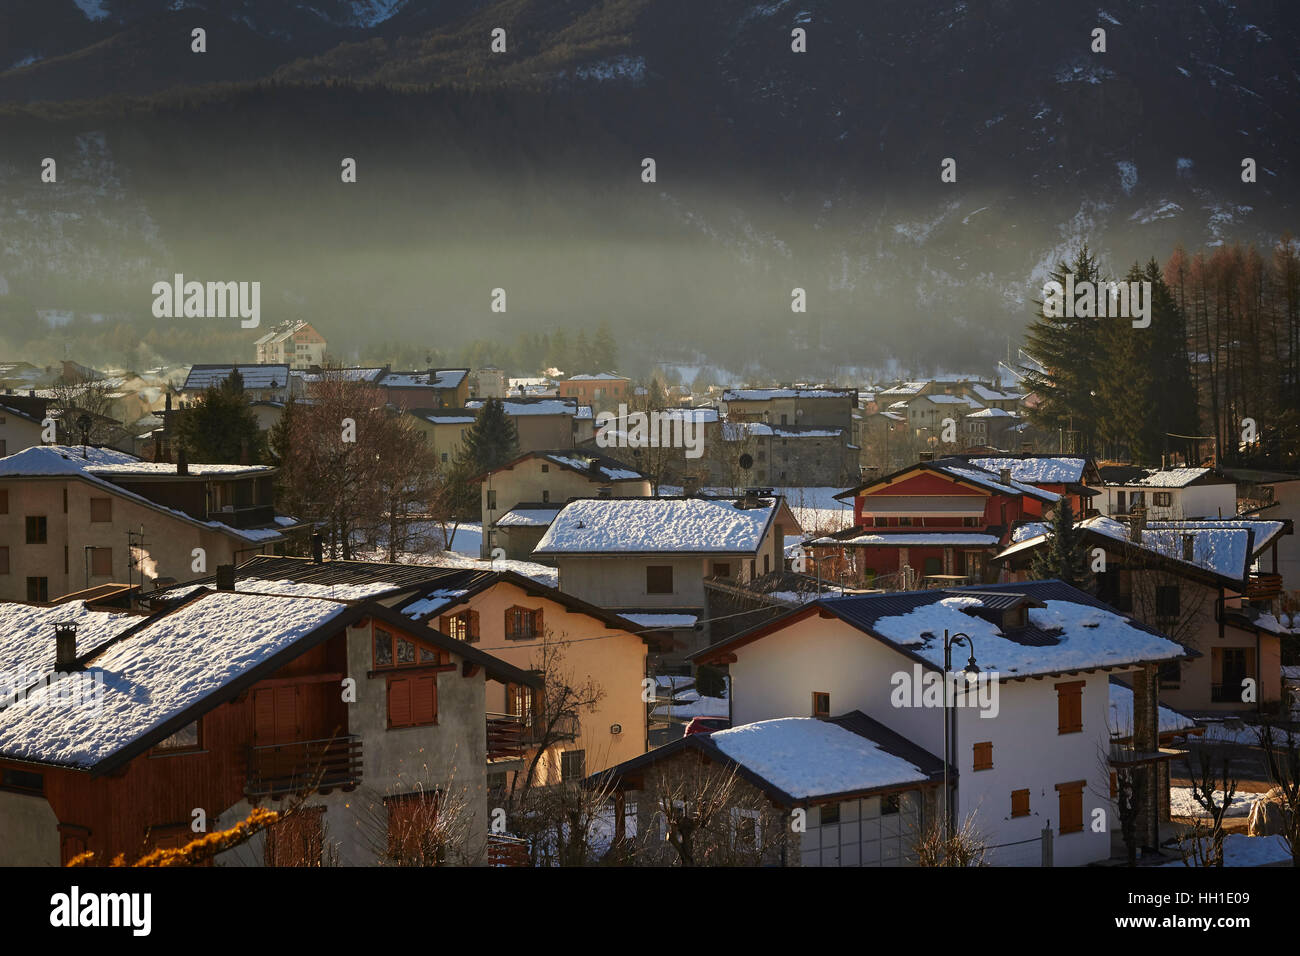 Village of Entracque, Cuneo, Piemonte, Italy. Italian Alps in the background. Stock Photo